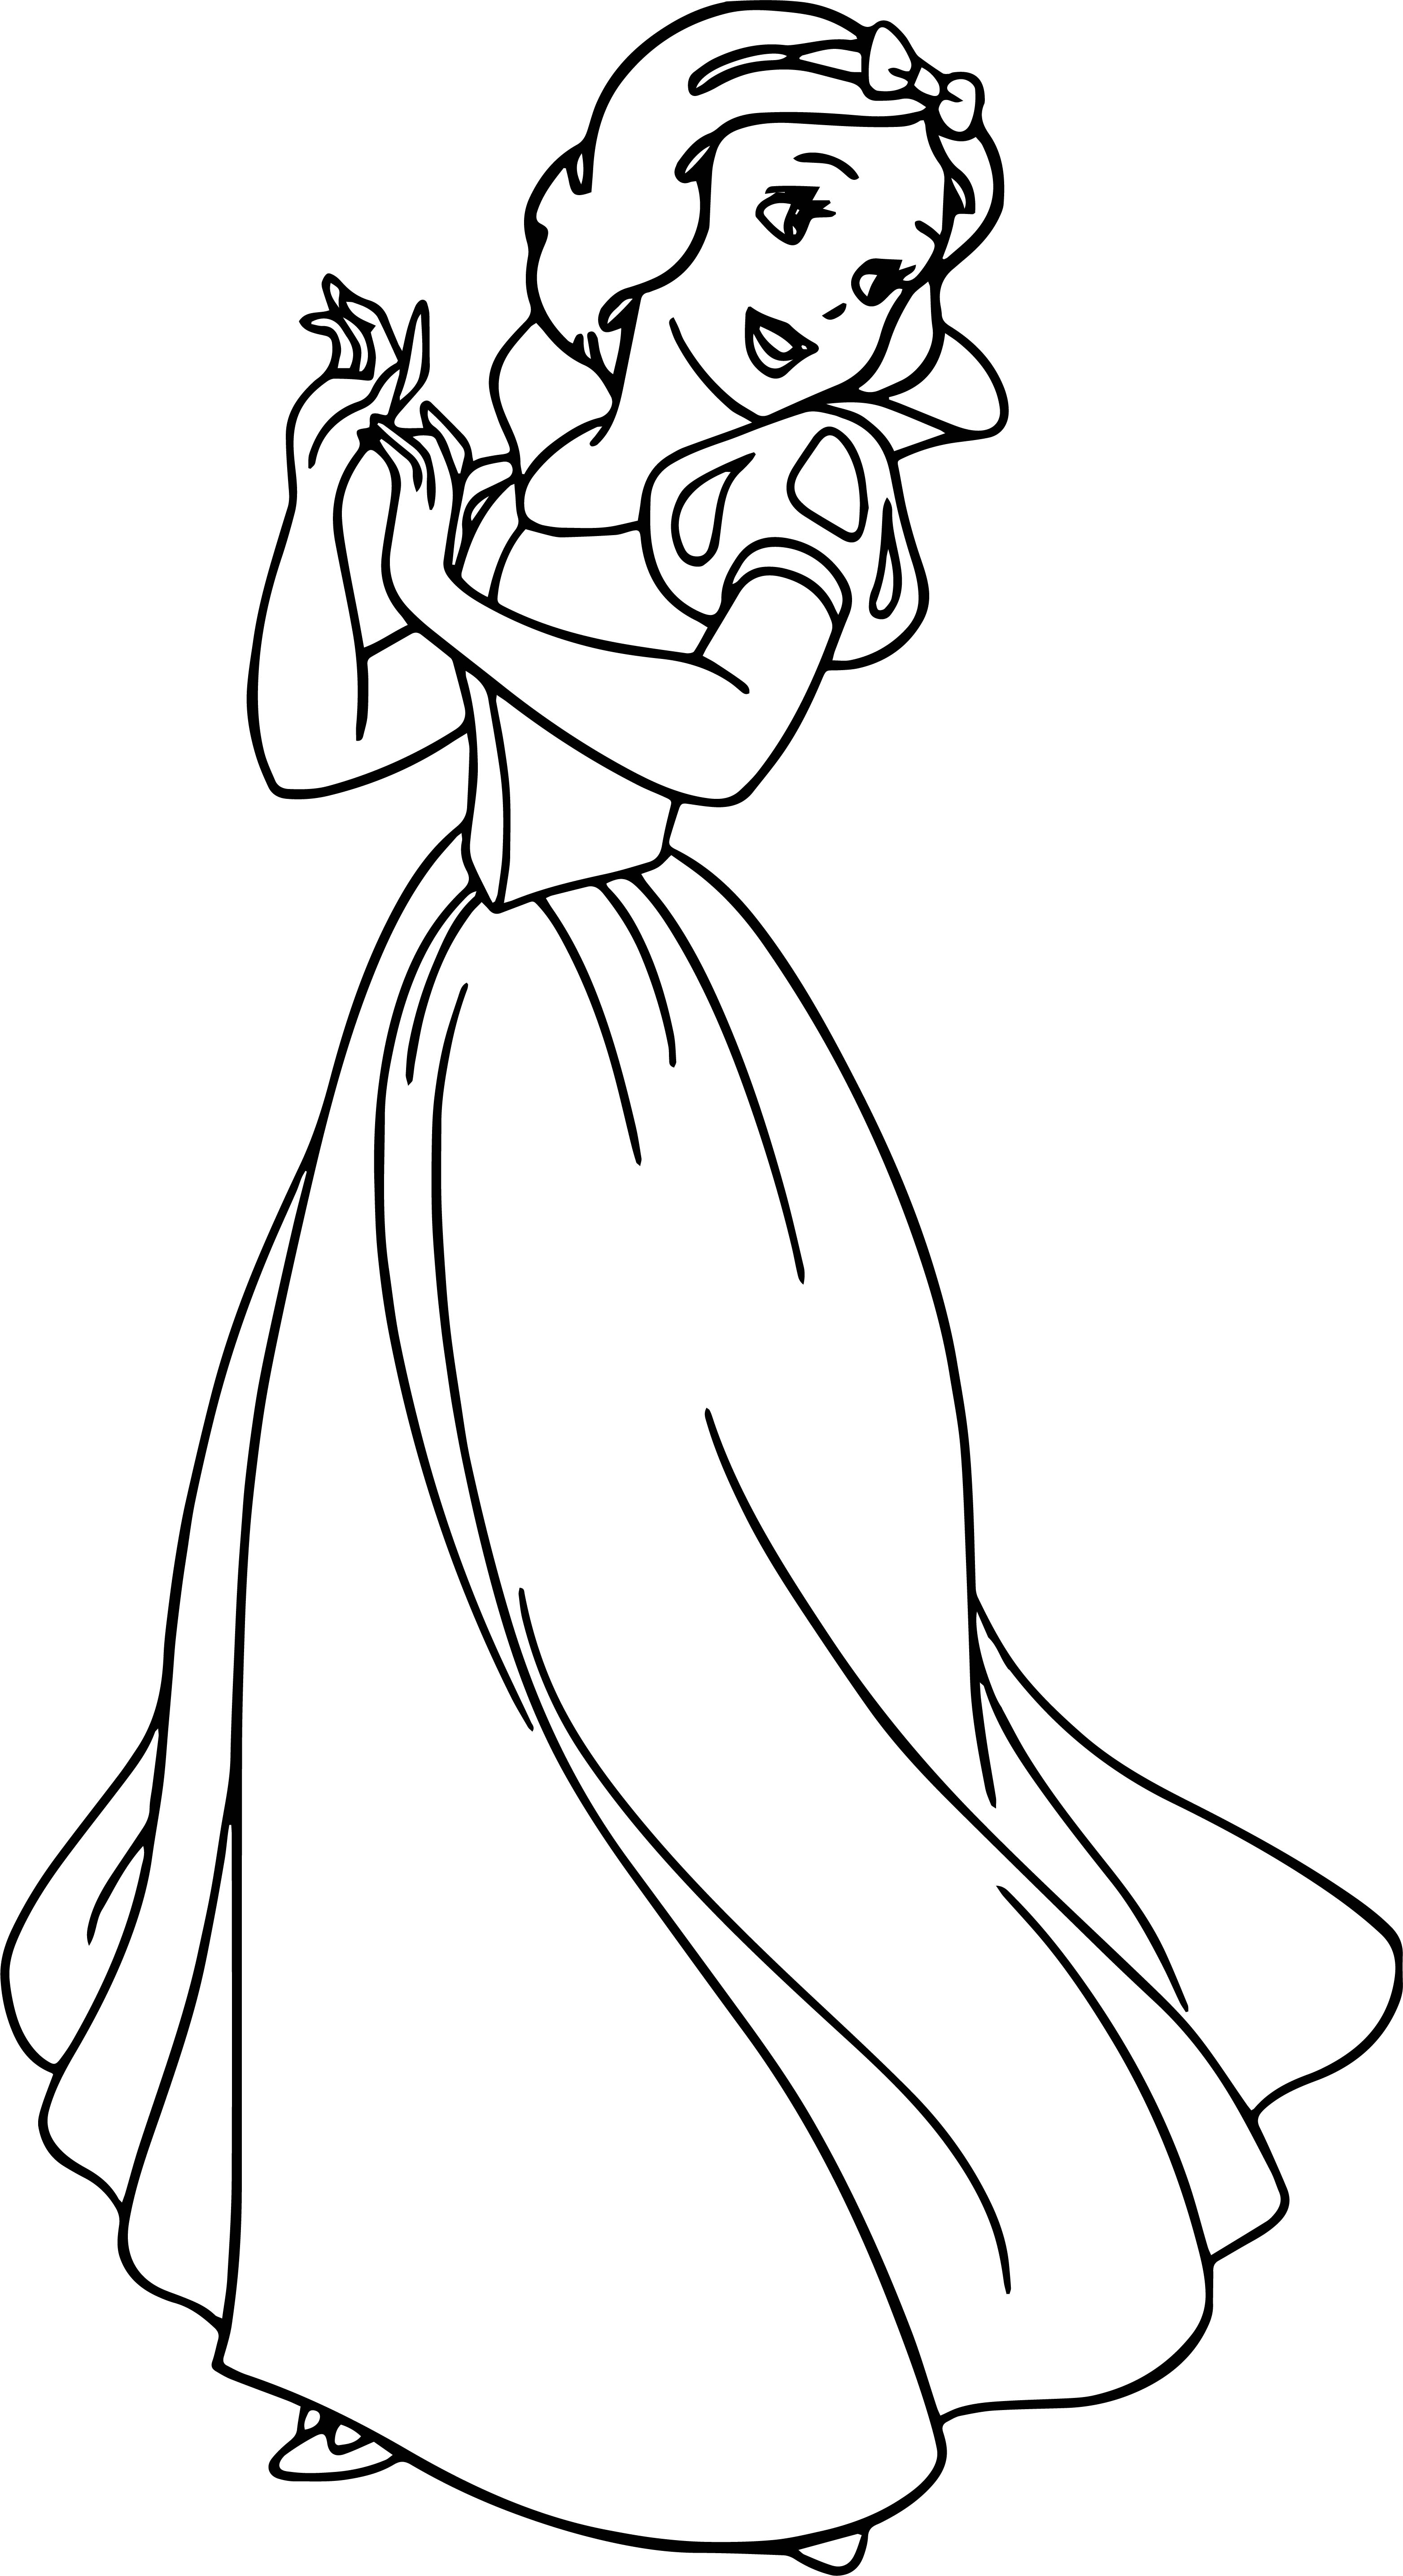 Snow White Turn Coloring Page | Wecoloringpage.com